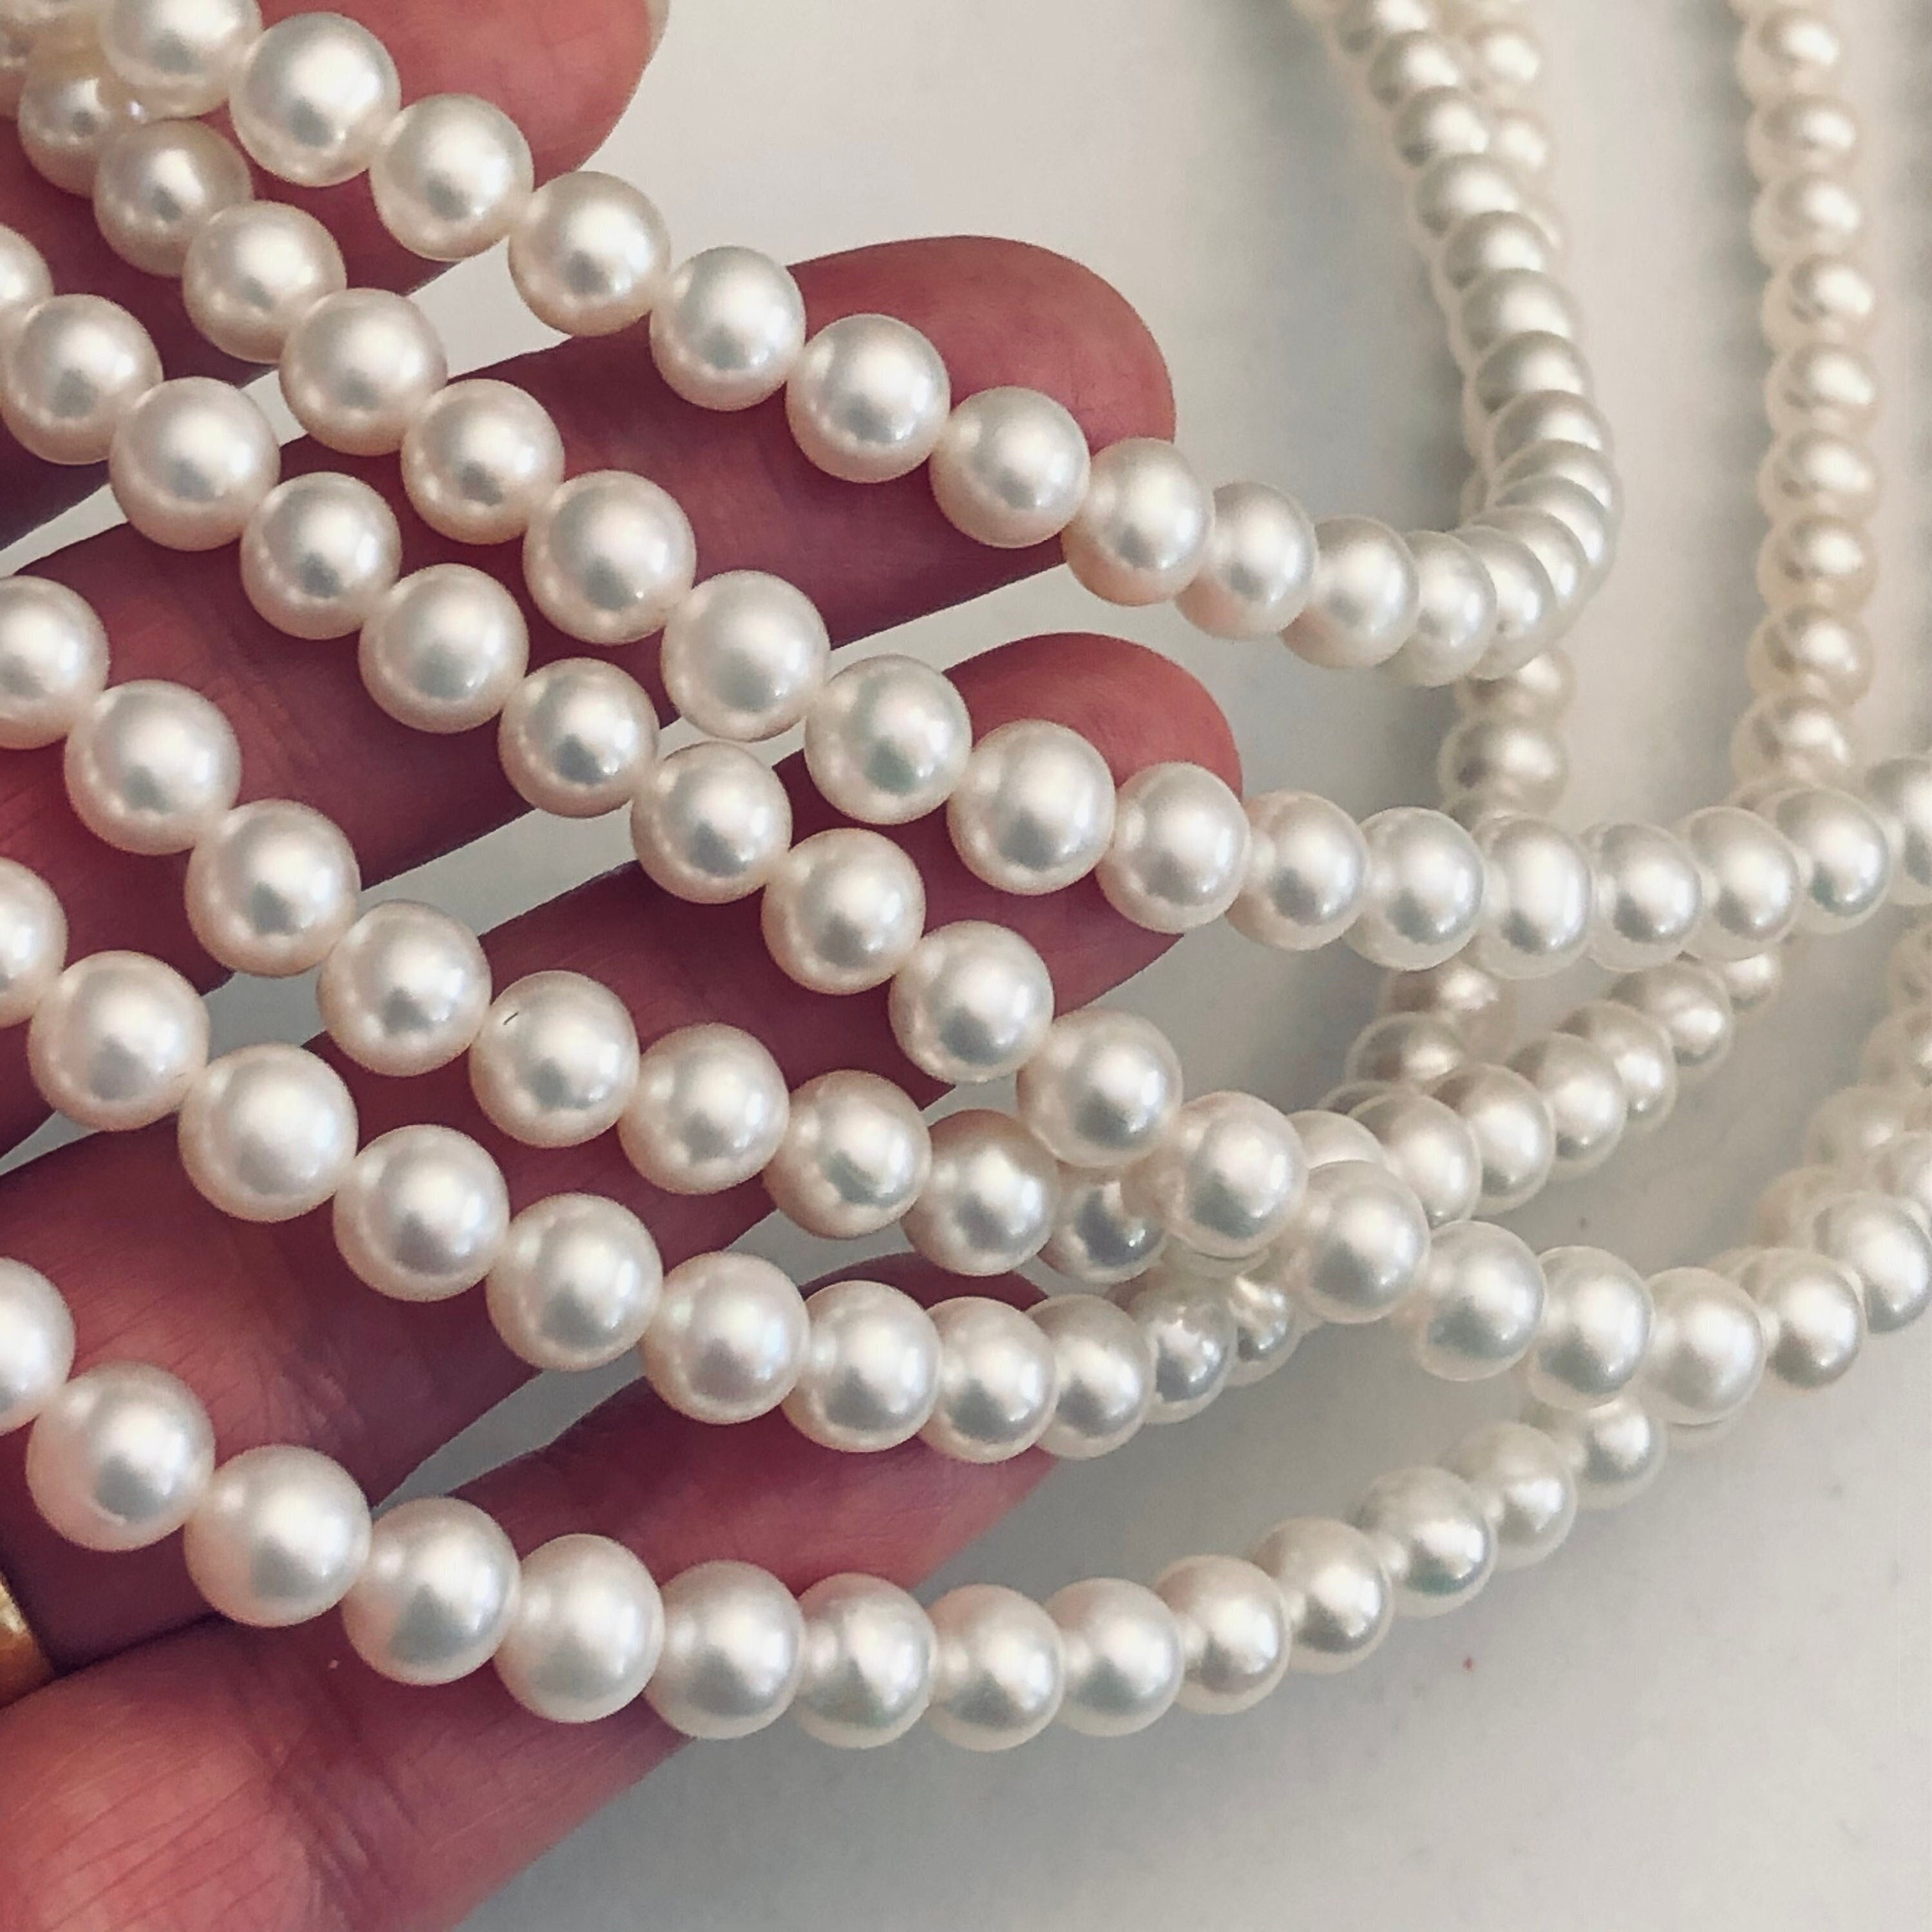 14 Inch 6-7mm Natural Freshwater Pearl Bead Strand, About 65 Beads, Ivory  White, Round Potato Shape, White Pearl Beads, Beach Jewelry Making